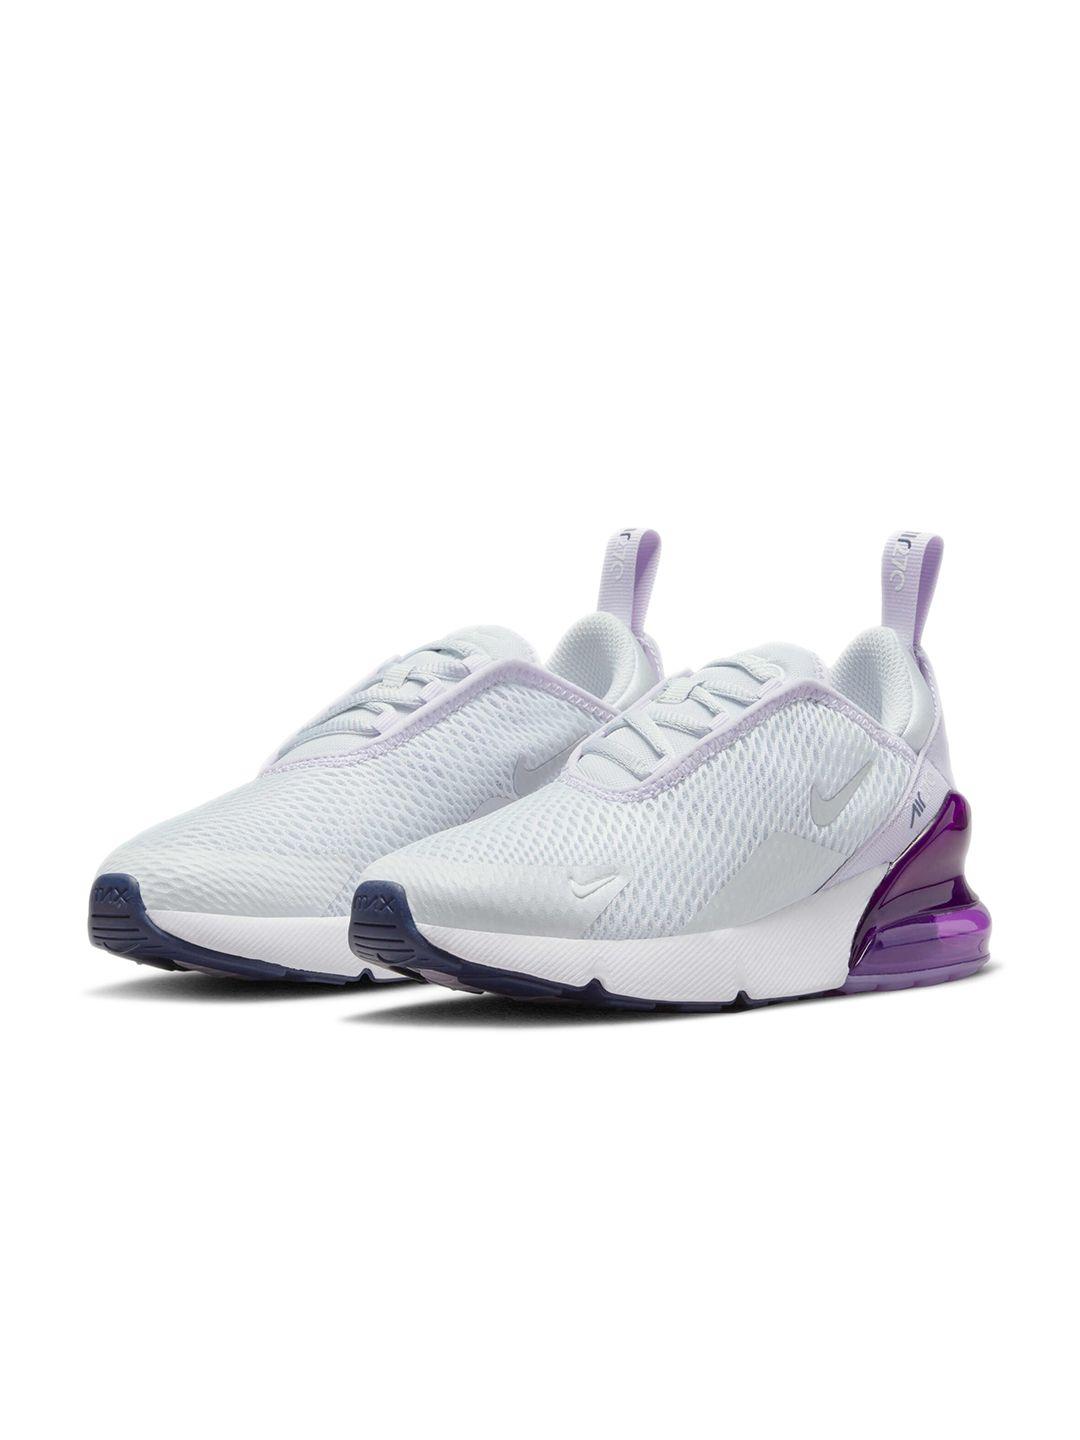 nike boys air max 270 younger sneakers